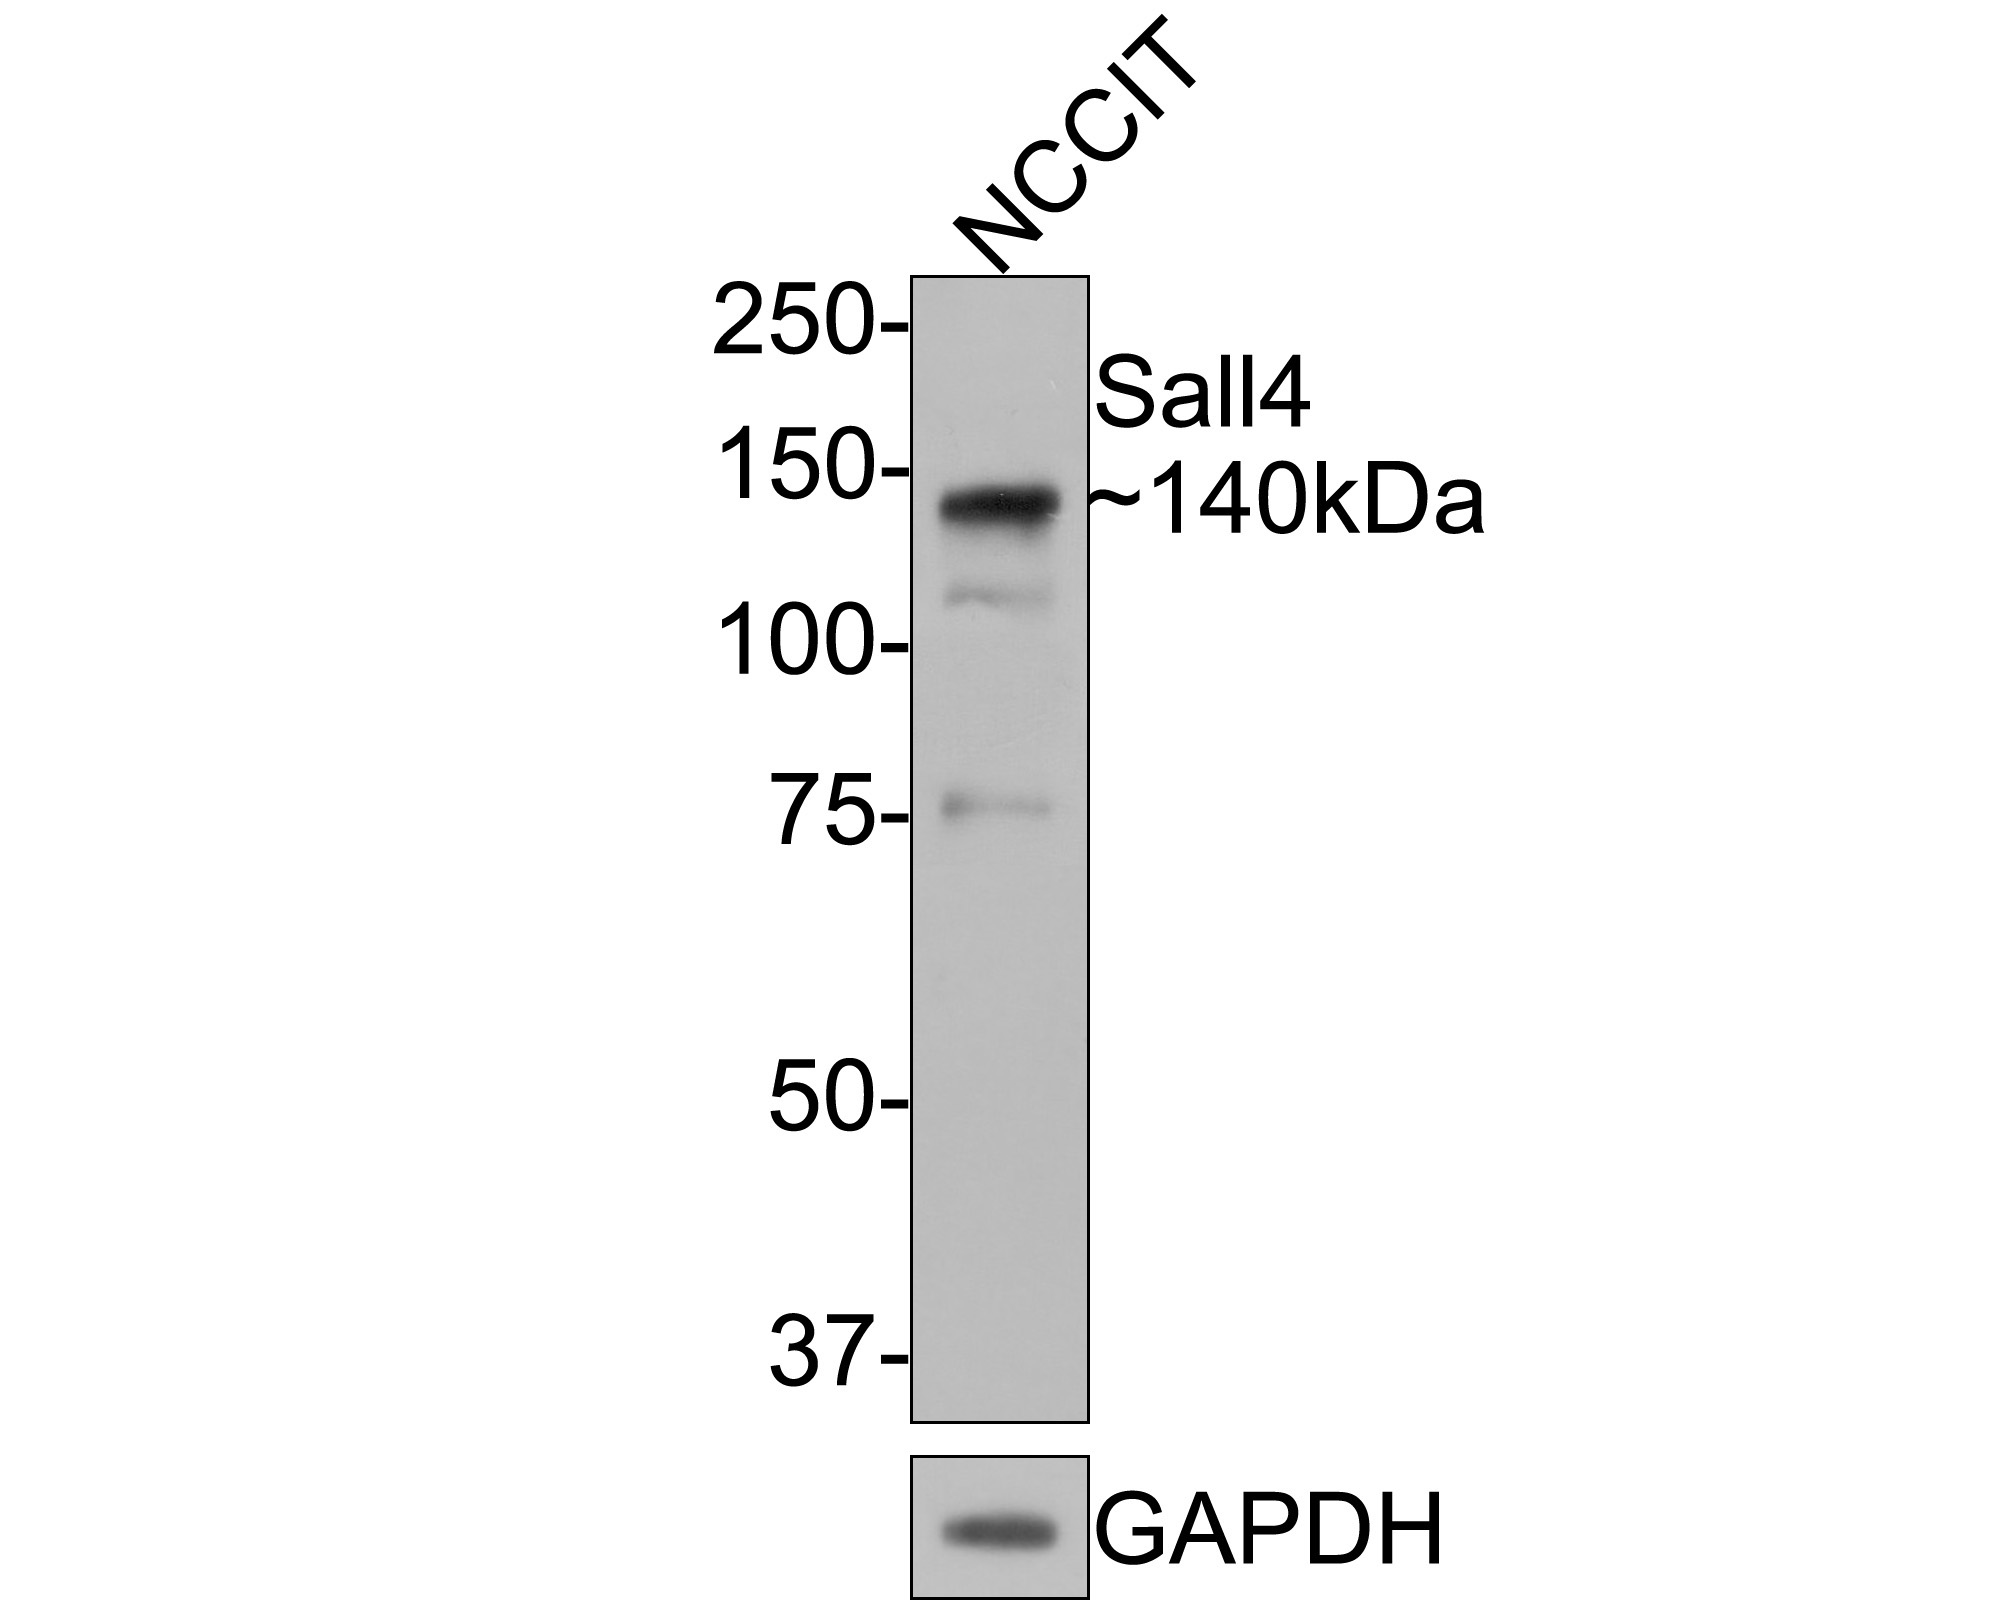 Western blot analysis of Sall4 on NCCIT cell lysates with Mouse anti-Sall4 antibody (HA601041) at 1/2,000 dilution.<br />
<br />
Lysates/proteins at 10 µg/Lane.<br />
<br />
Predicted band size: 112 kDa<br />
Observed band size: 140/110/75 kDa<br />
<br />
Exposure time: 1 minute;<br />
<br />
8% SDS-PAGE gel.<br />
<br />
Proteins were transferred to a PVDF membrane and blocked with 5% NFDM/TBST for 1 hour at room temperature. The primary antibody (HA601041) at 1/2,000 dilution was used in 5% NFDM/TBST at room temperature for 2 hours. Goat Anti-Mouse IgG - HRP Secondary Antibody (HA1006) at 1:100,000 dilution was used for 1 hour at room temperature.